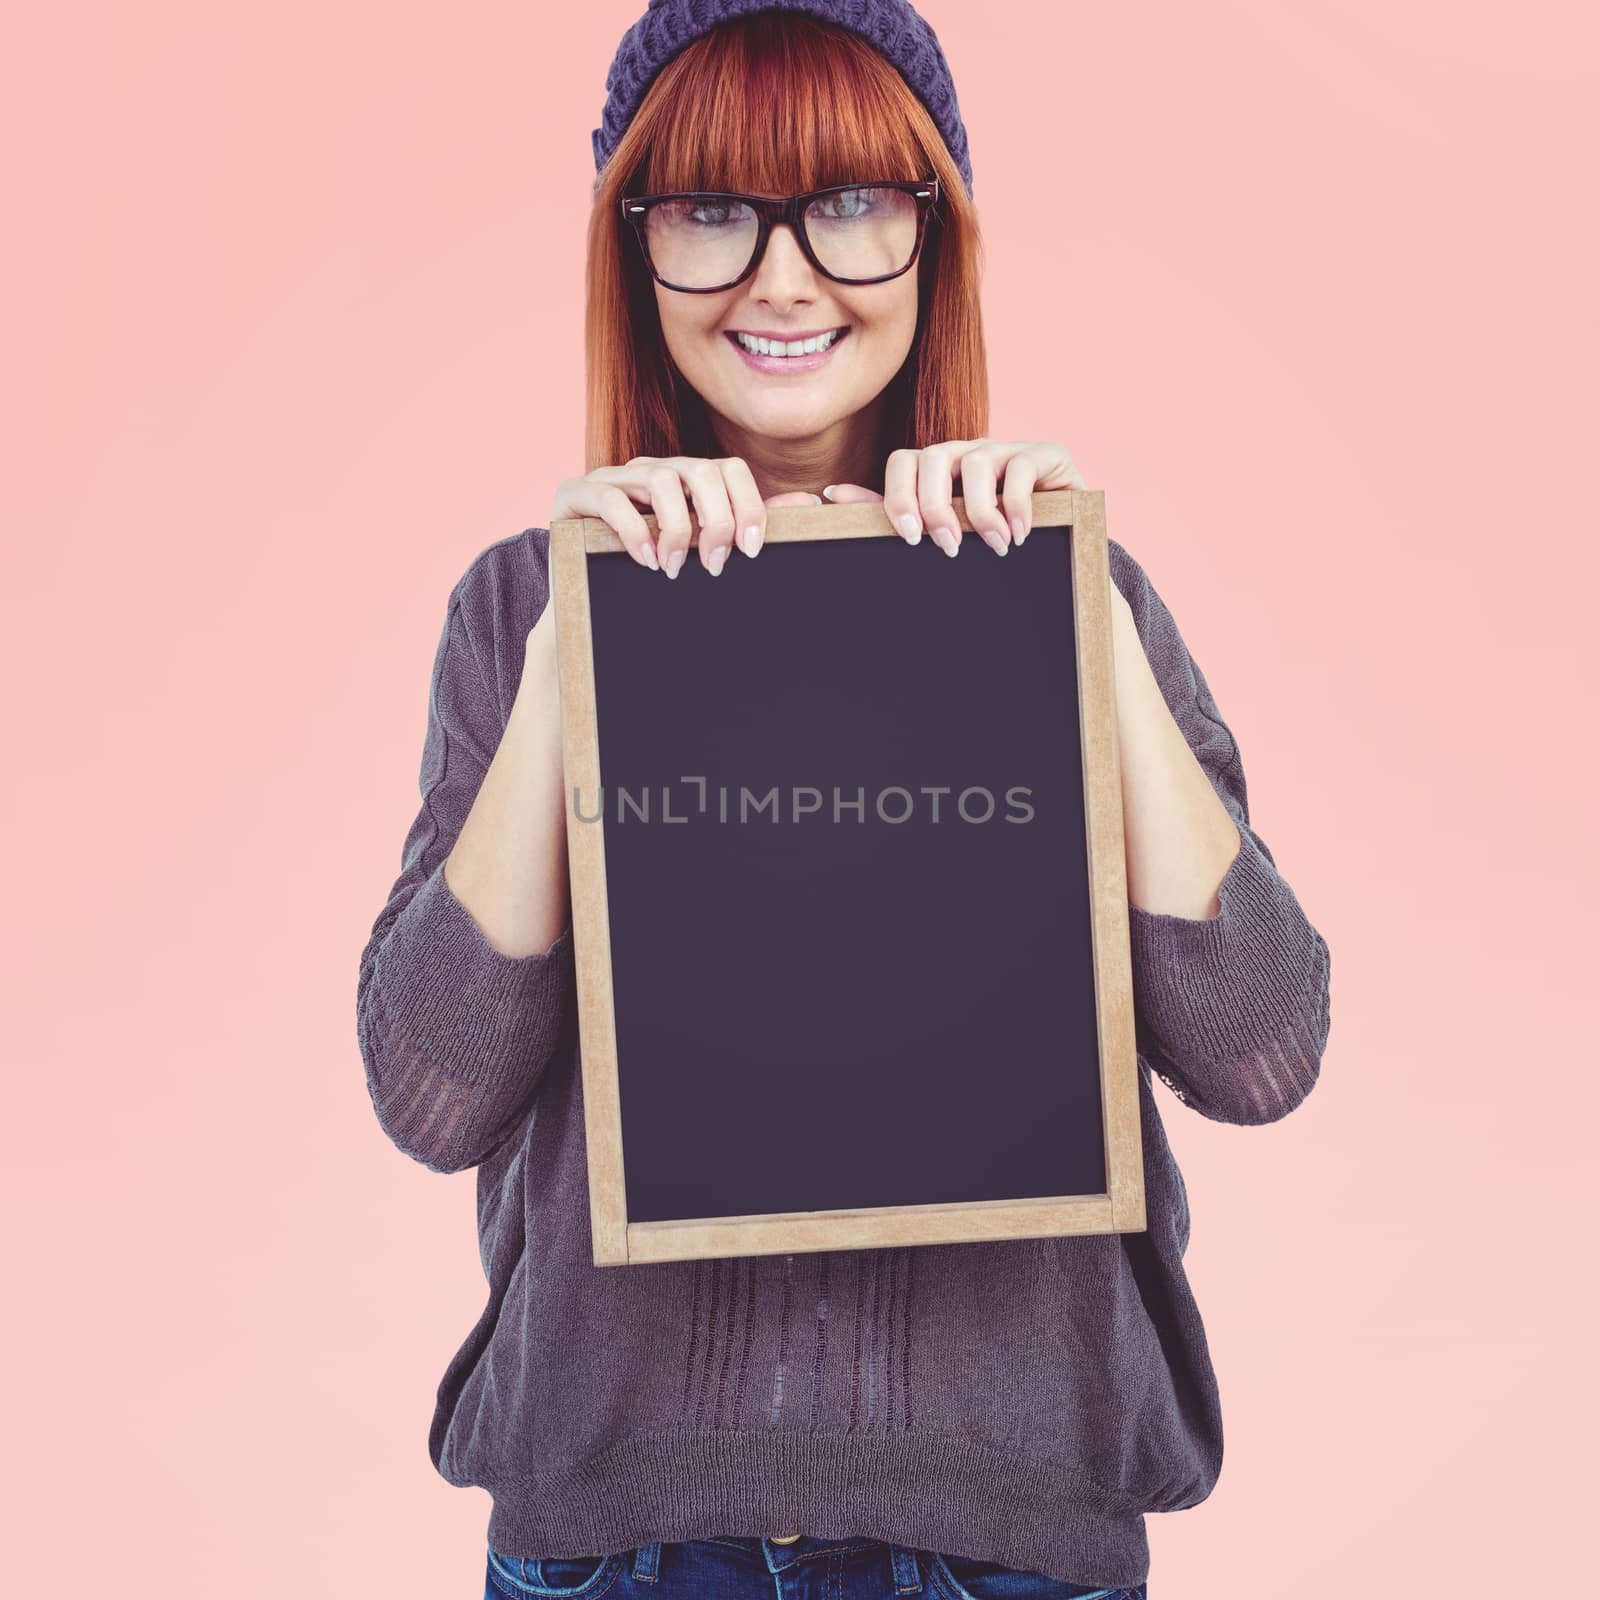 Smiling hipster woman holding blackboard against pastel pink